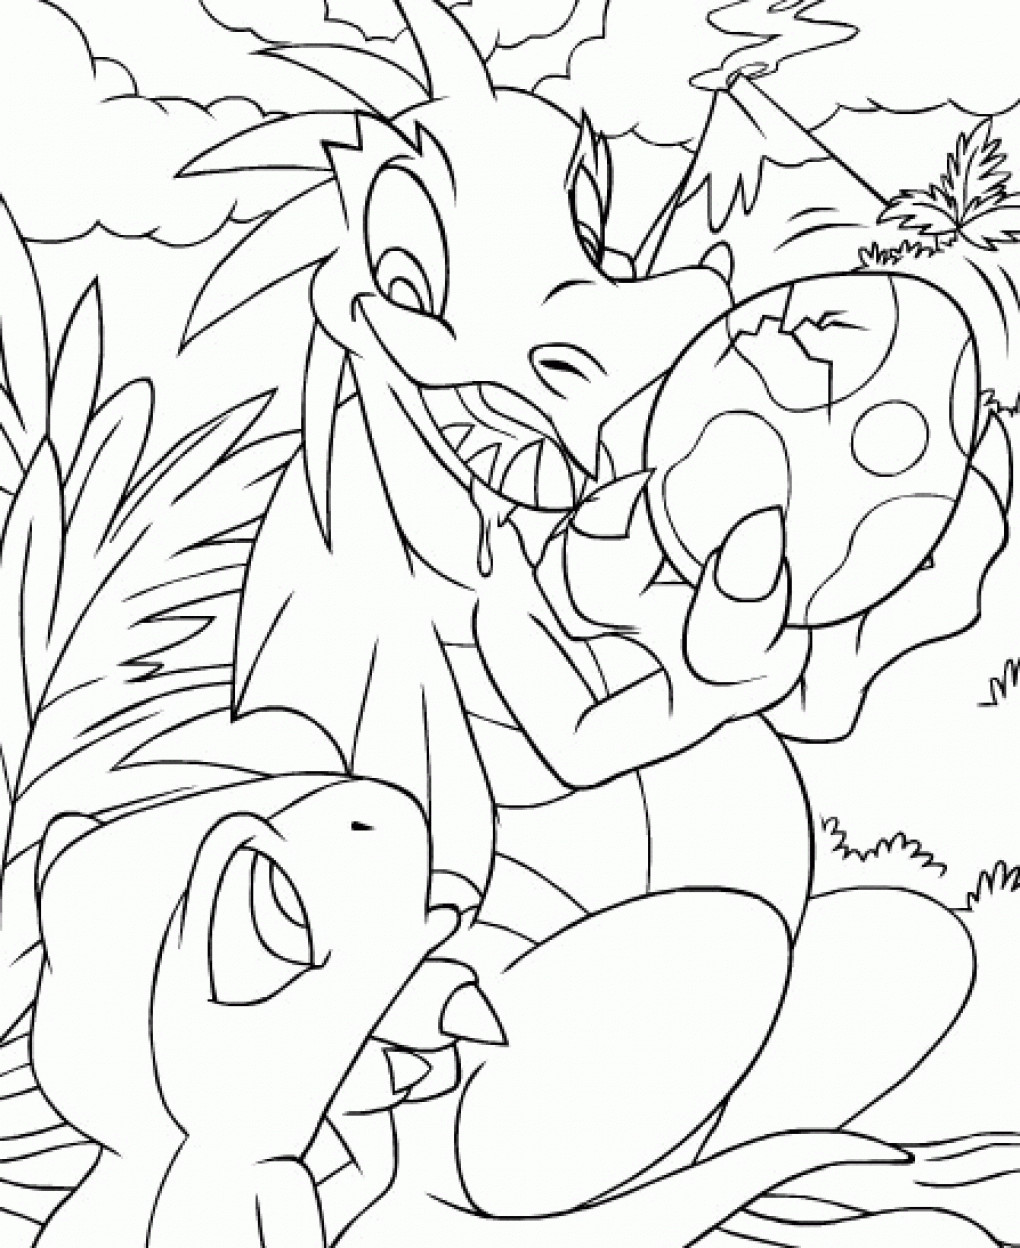 Kids Online Coloring Page
 Free Printable Neopets Coloring Pages For kids